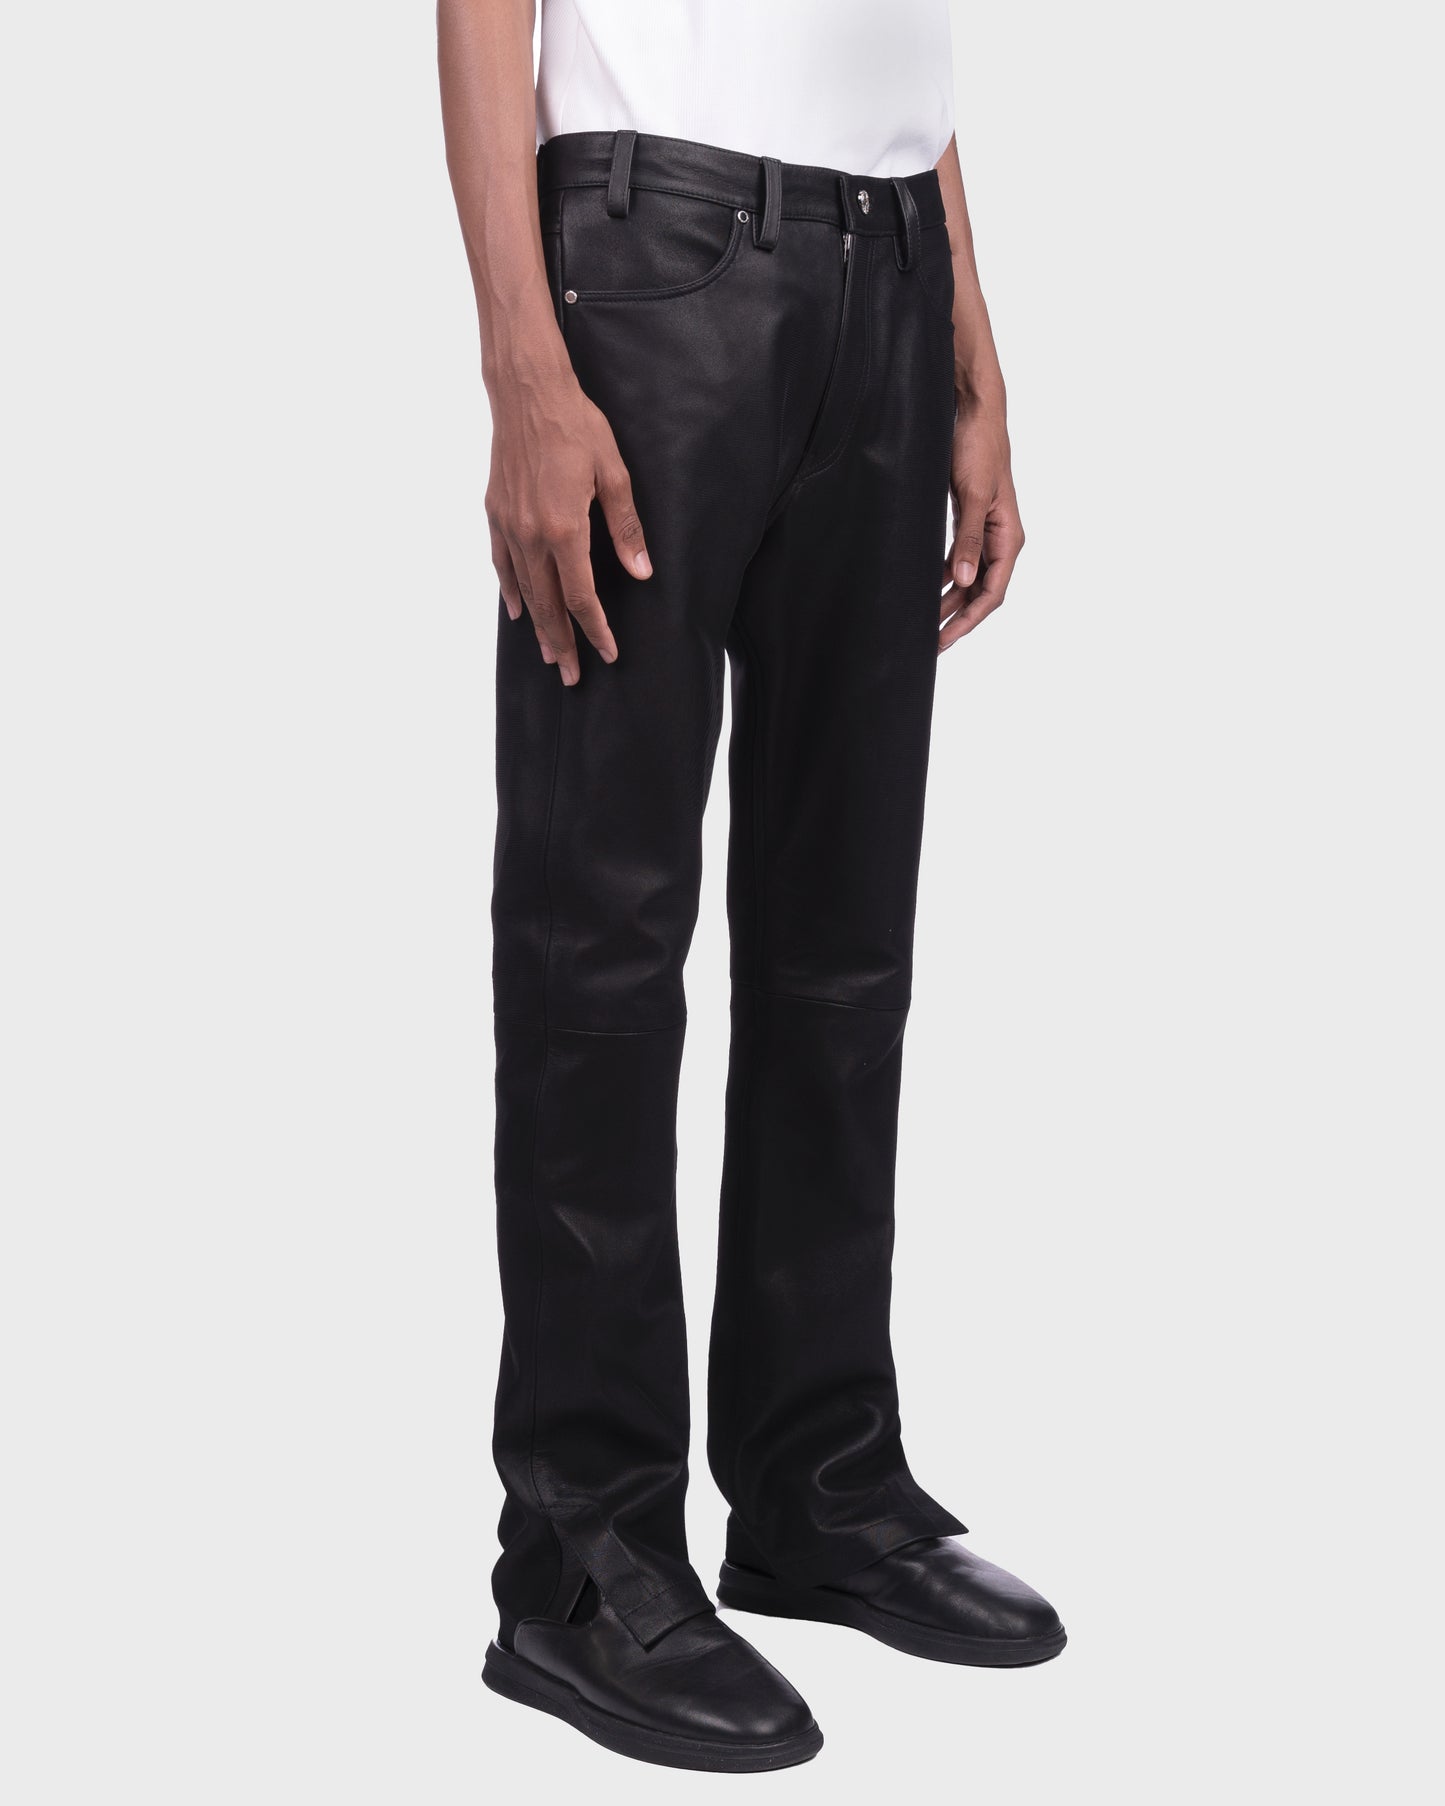 Leather Tulle Jeans - Black